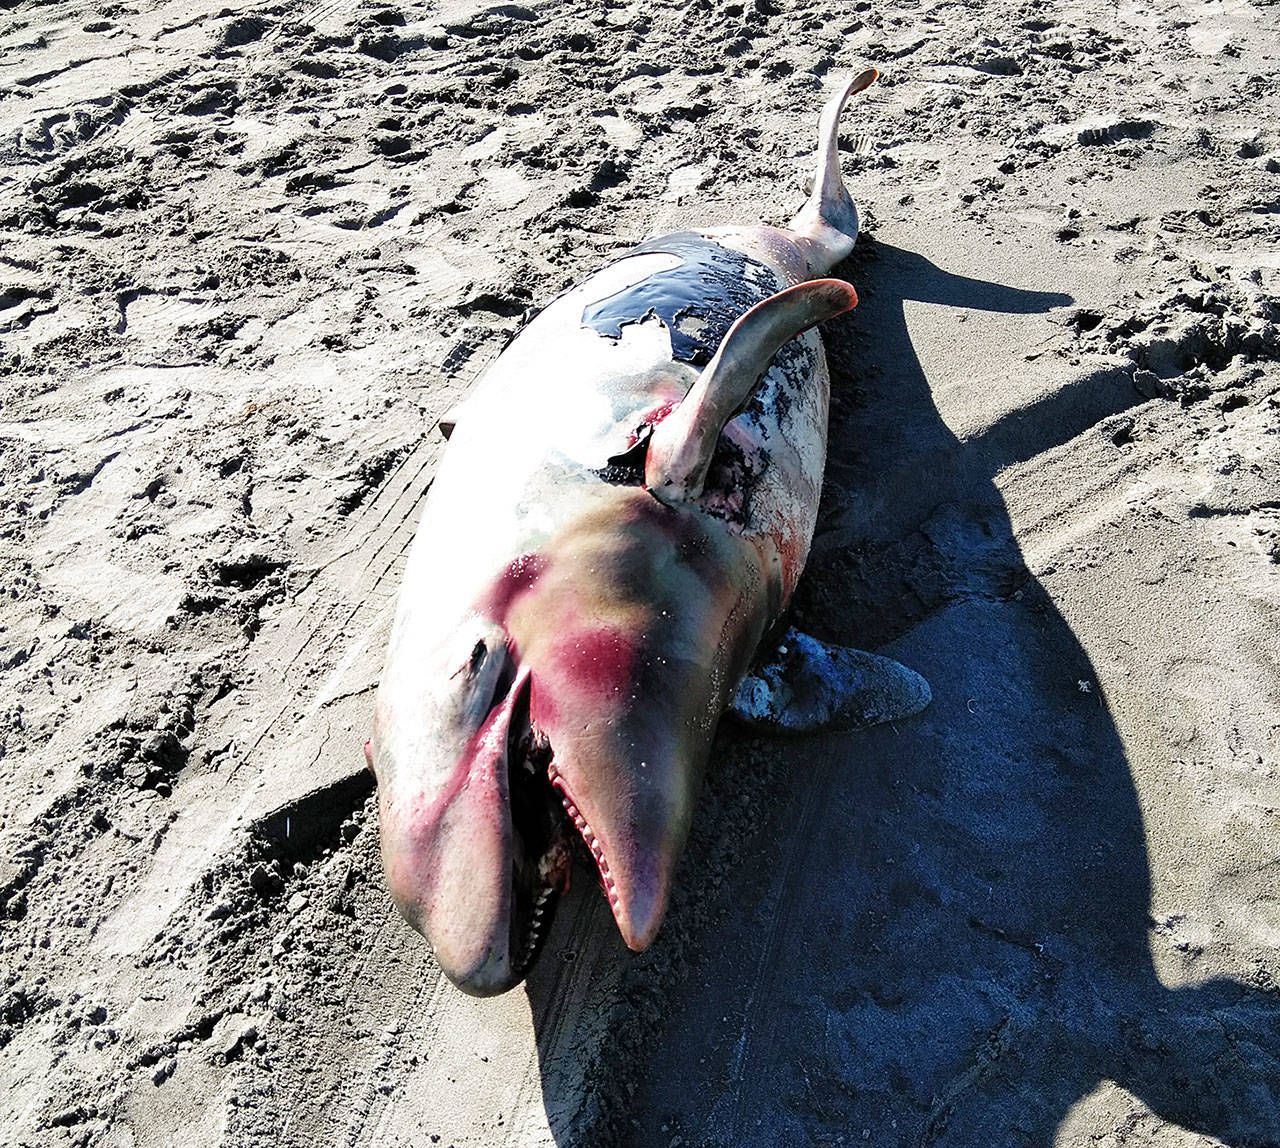 Dennis Schulte photo of the deceased Orca calf on the beach in Ocean Shores.